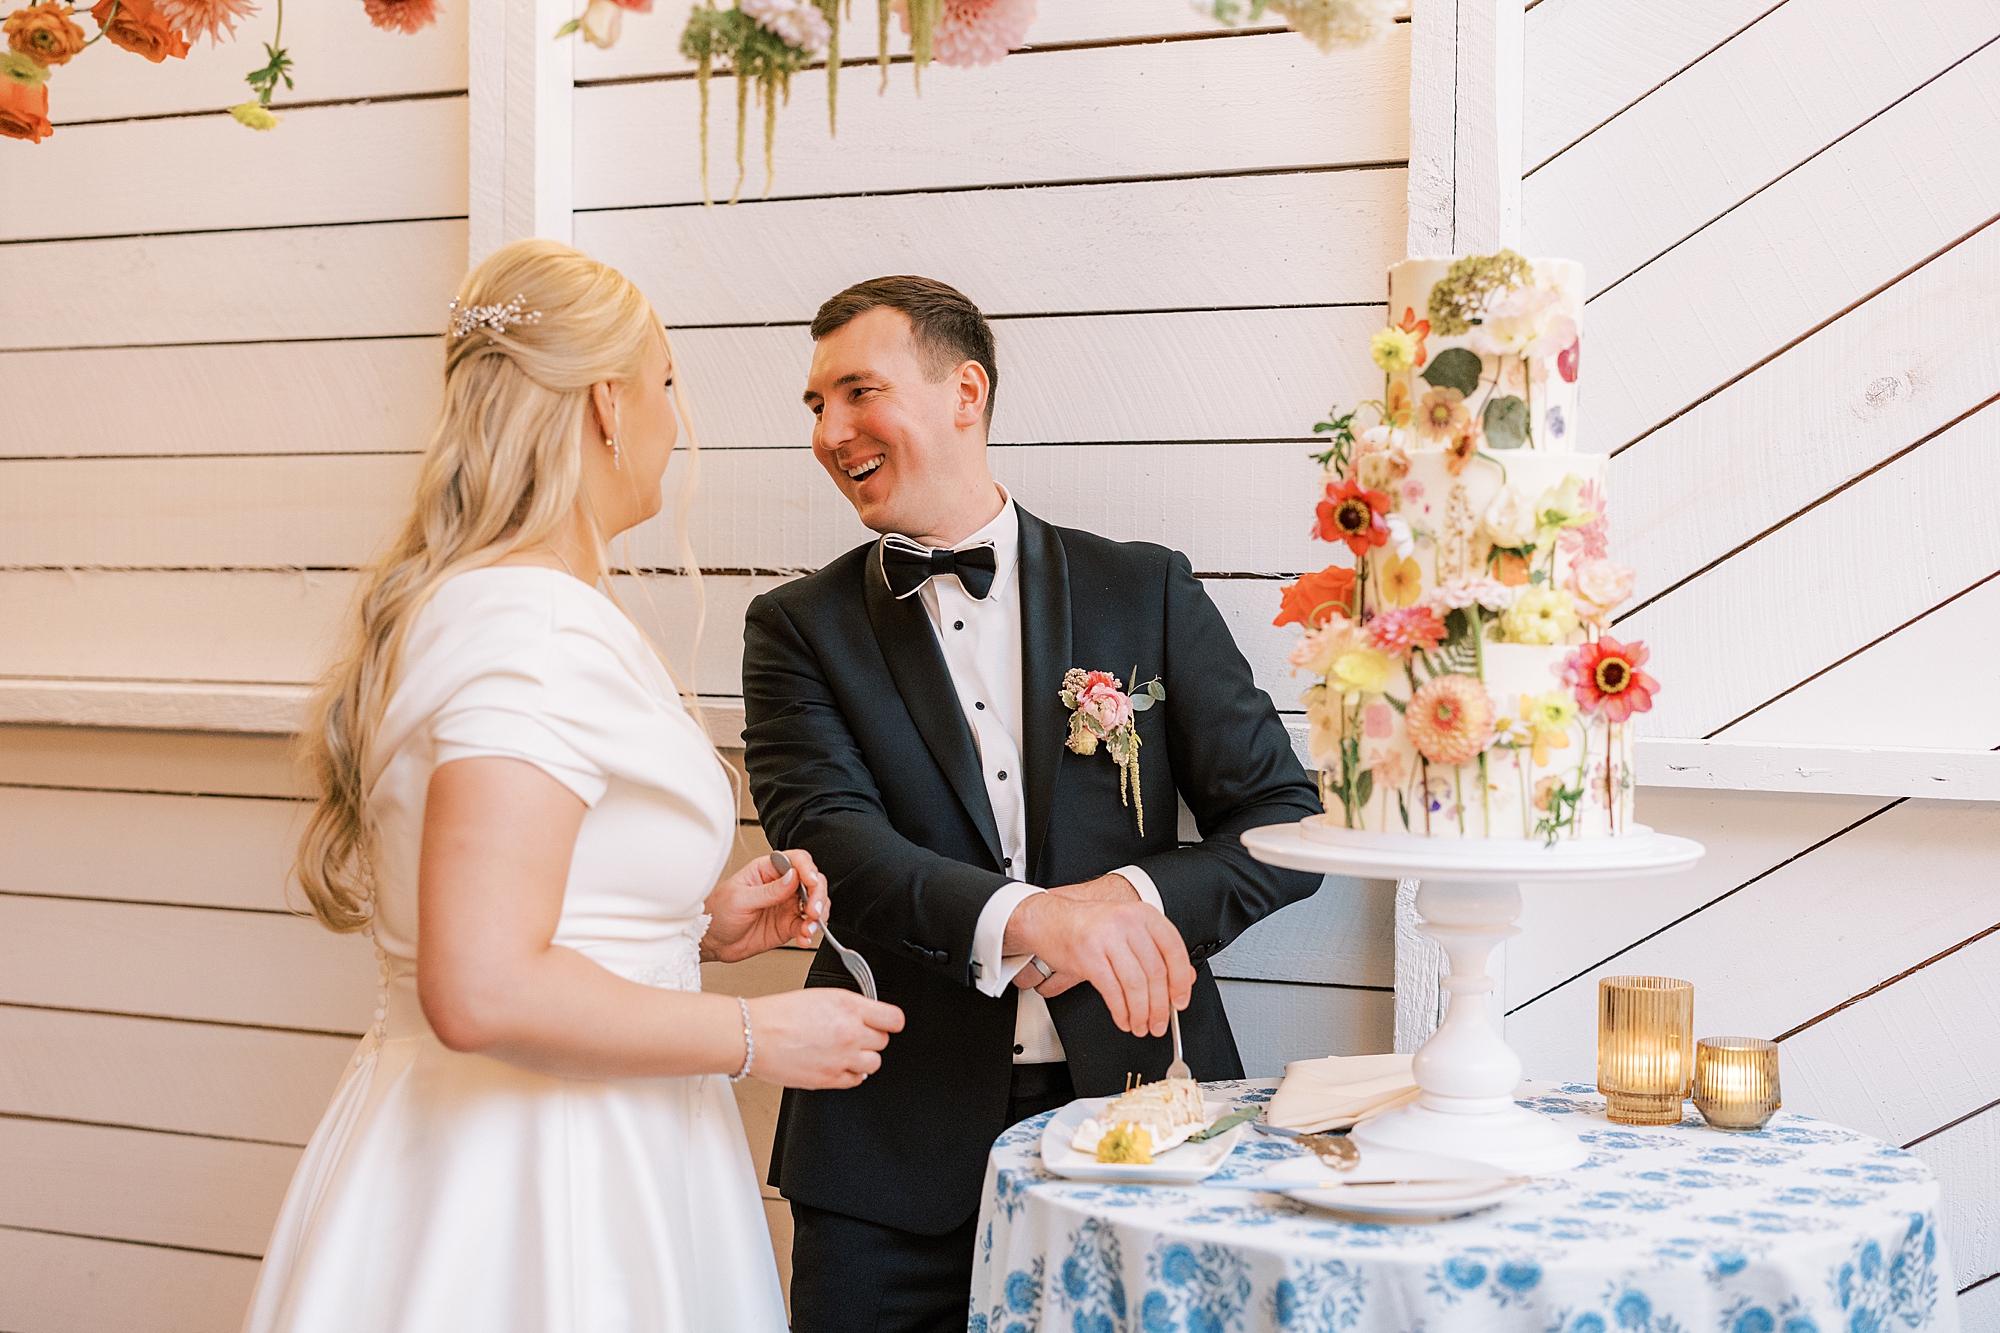 bride and groom smile together during cake cutting at Terrain Gardens wedding reception